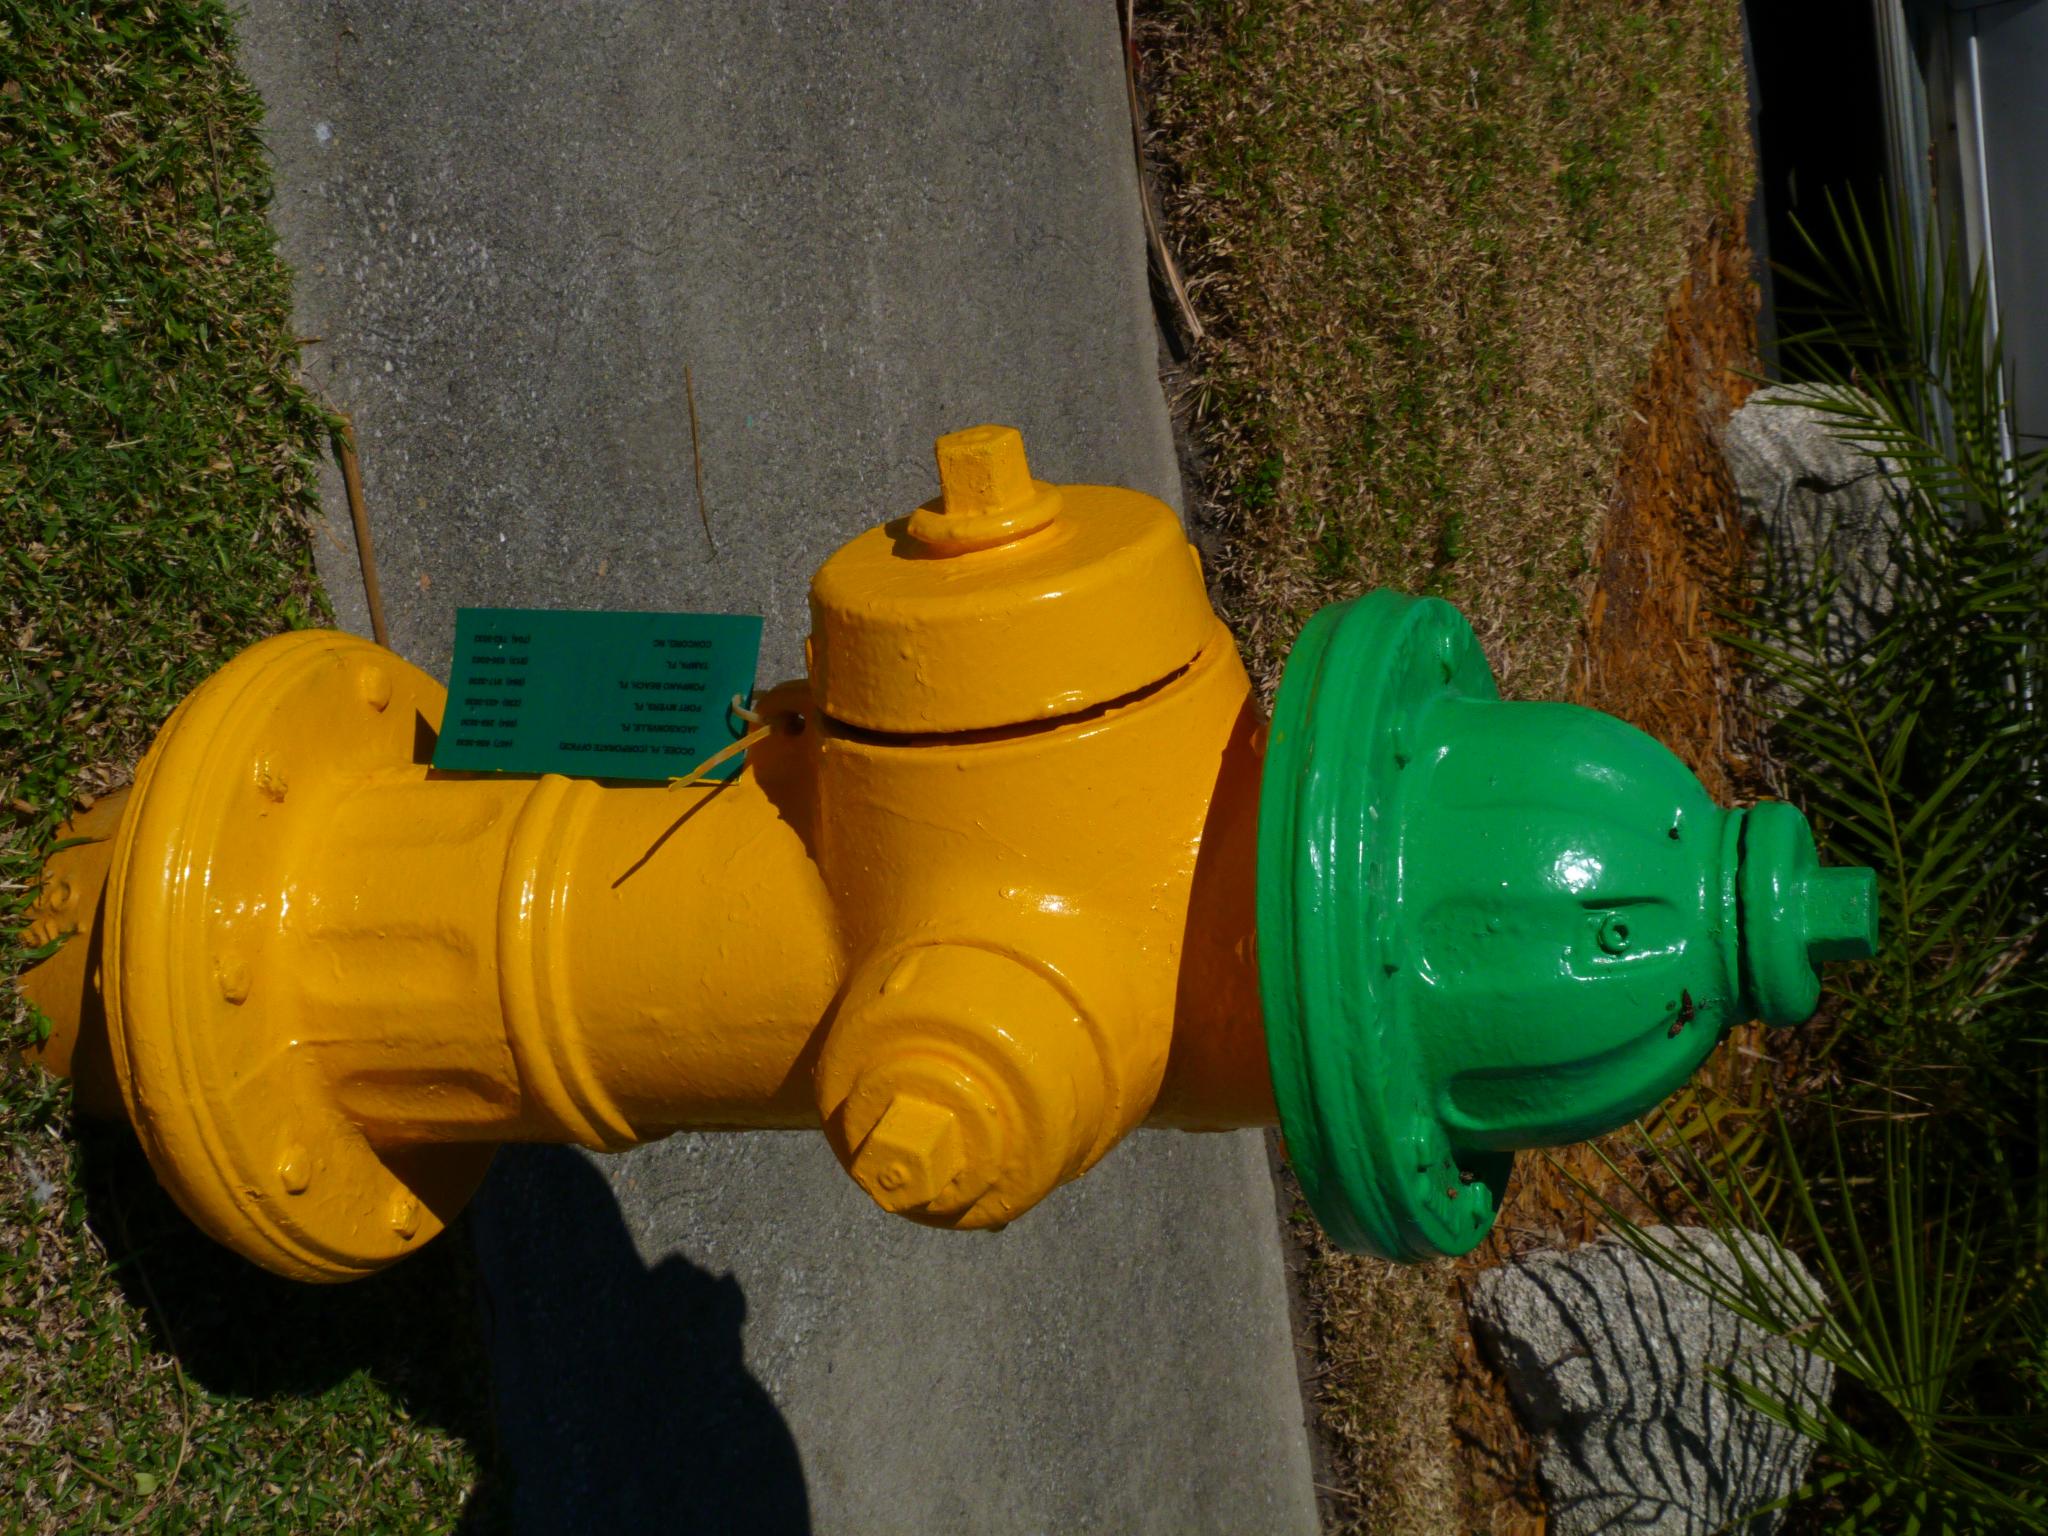 a fire hydrant painted in yellow and green